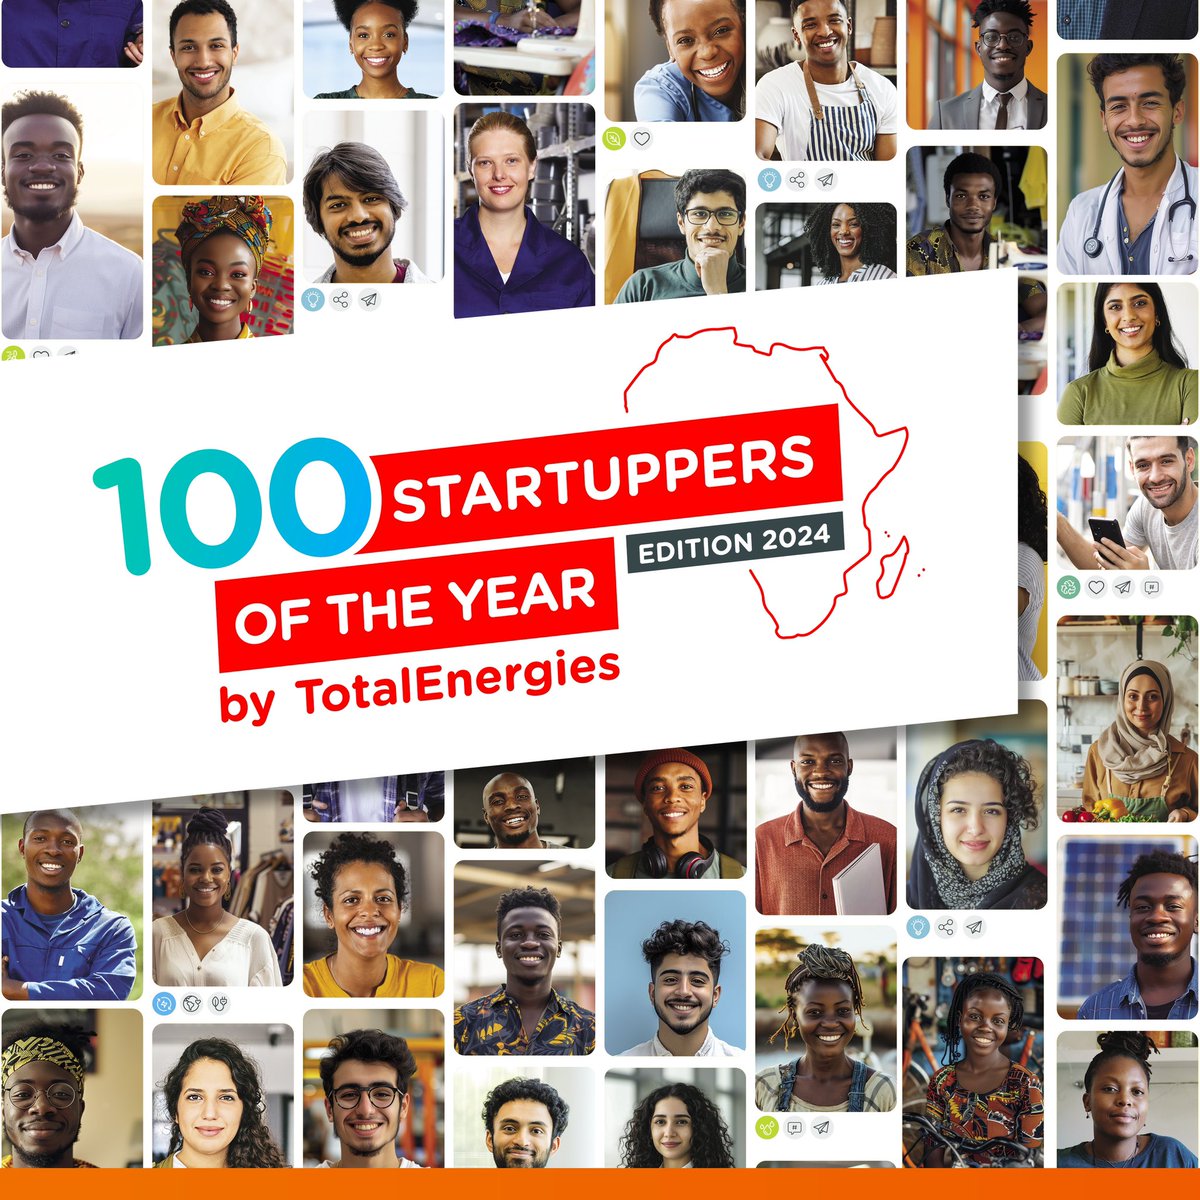 👩🏾‍💻👨🏾‍🌾👩🏽‍🏫👨🏾‍🏭 Are you a young entrepreneur with an innovative business idea or a startup less than 3 years old that can have a positive impact in Uganda? 💯💡🌍 The fourth edition of Startupper of the Year Challenge by TotalEnergies will reward 100 entrepreneurs across 32 Africain